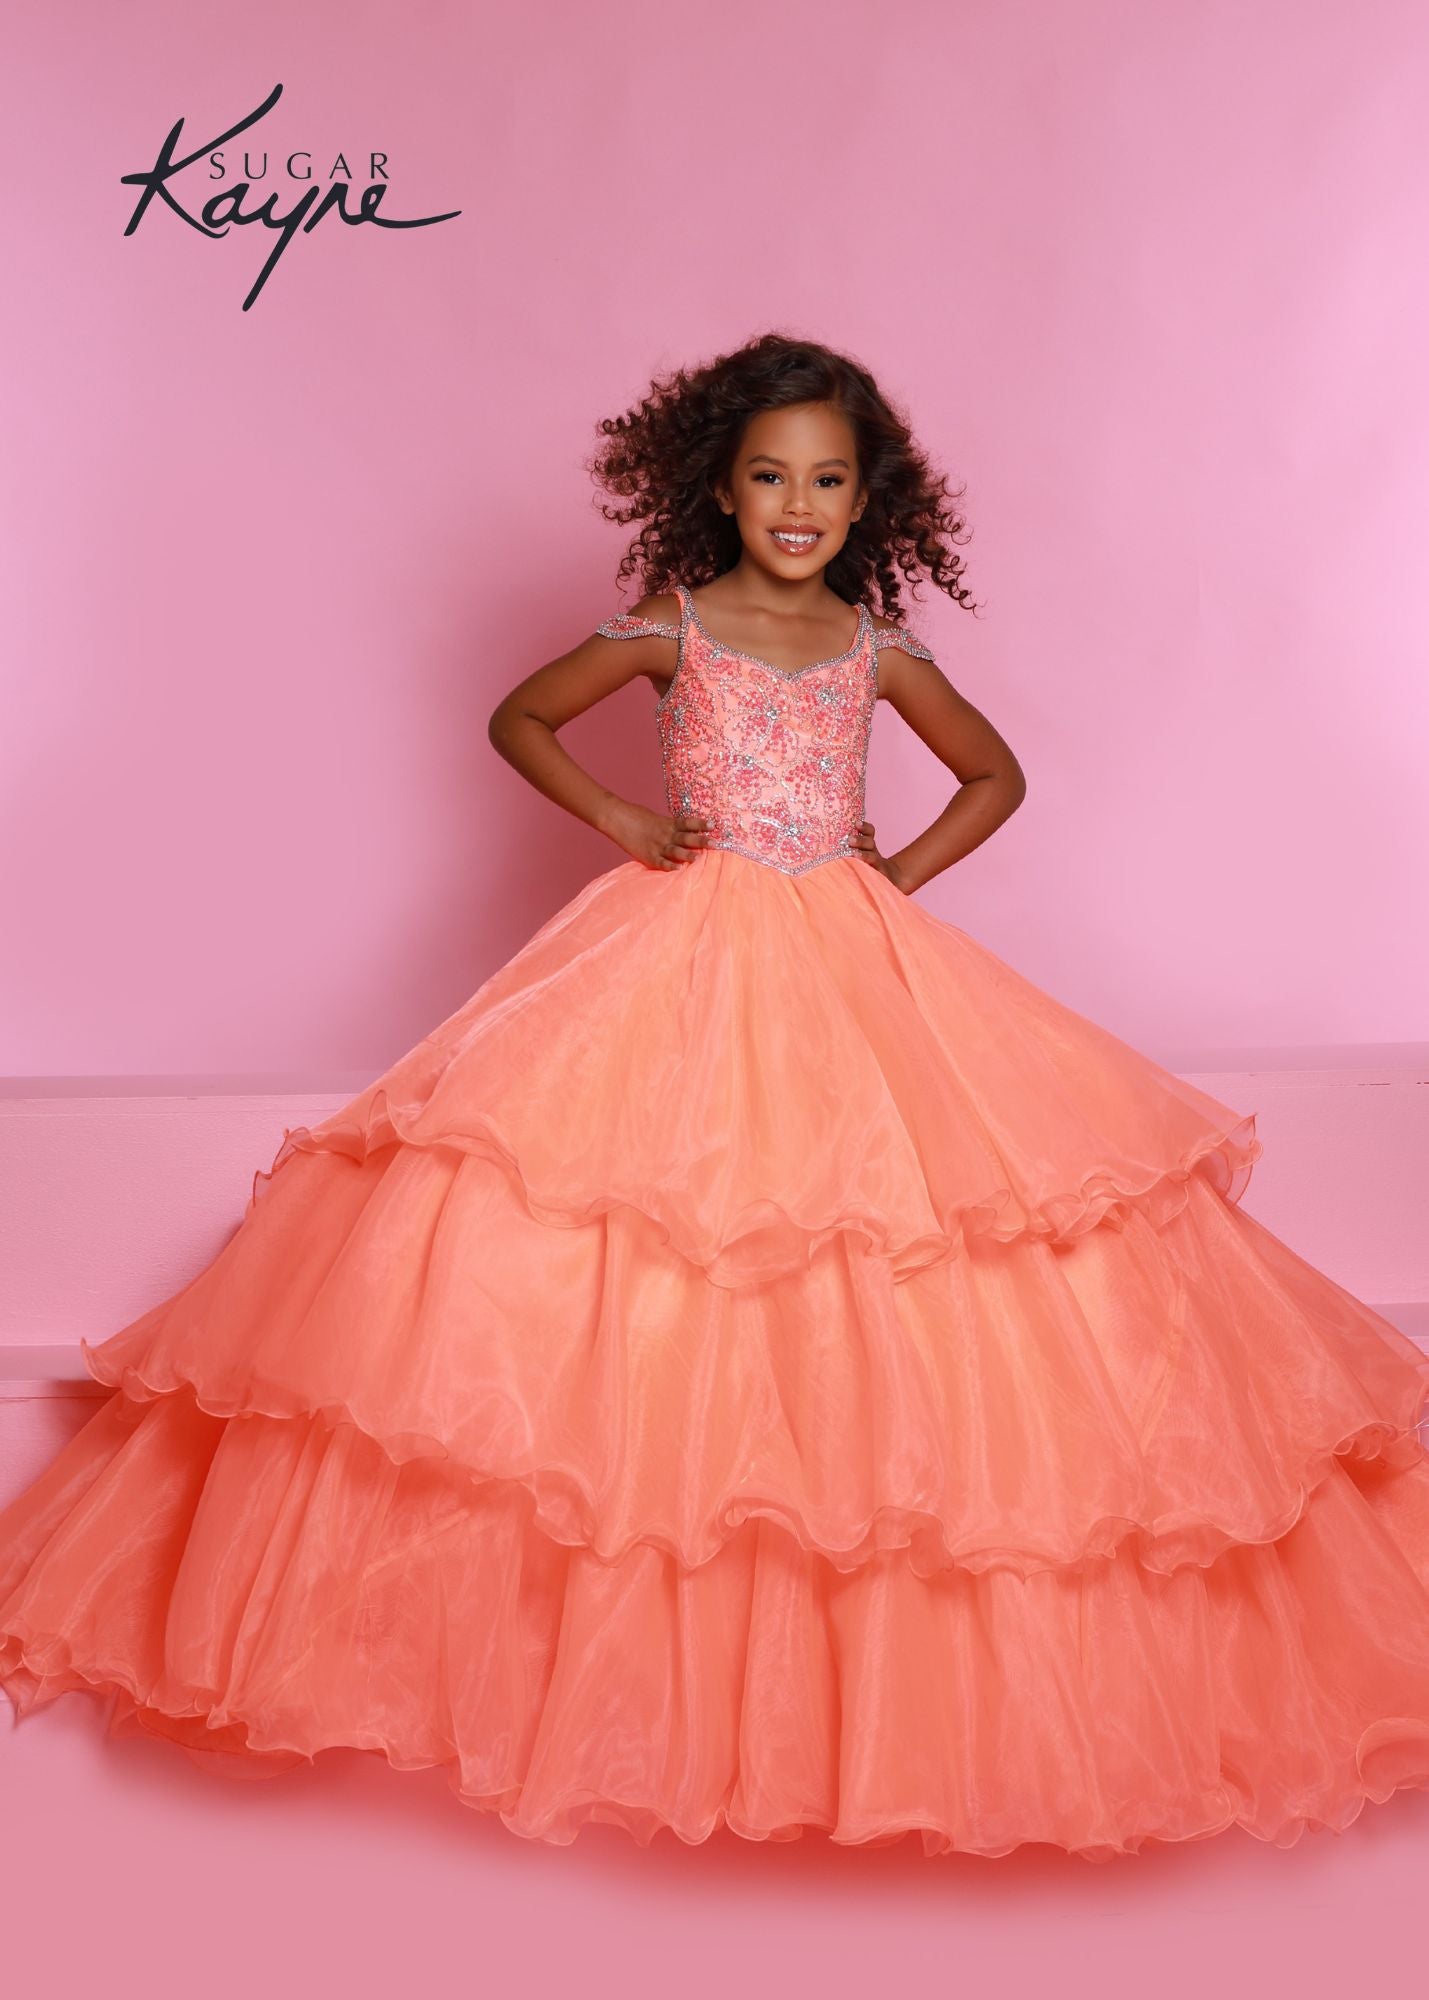 Sugar Kayne C318 Long Layer Ruffle Girls Pageant Dress off the Shoulder Ball Gown Beaded